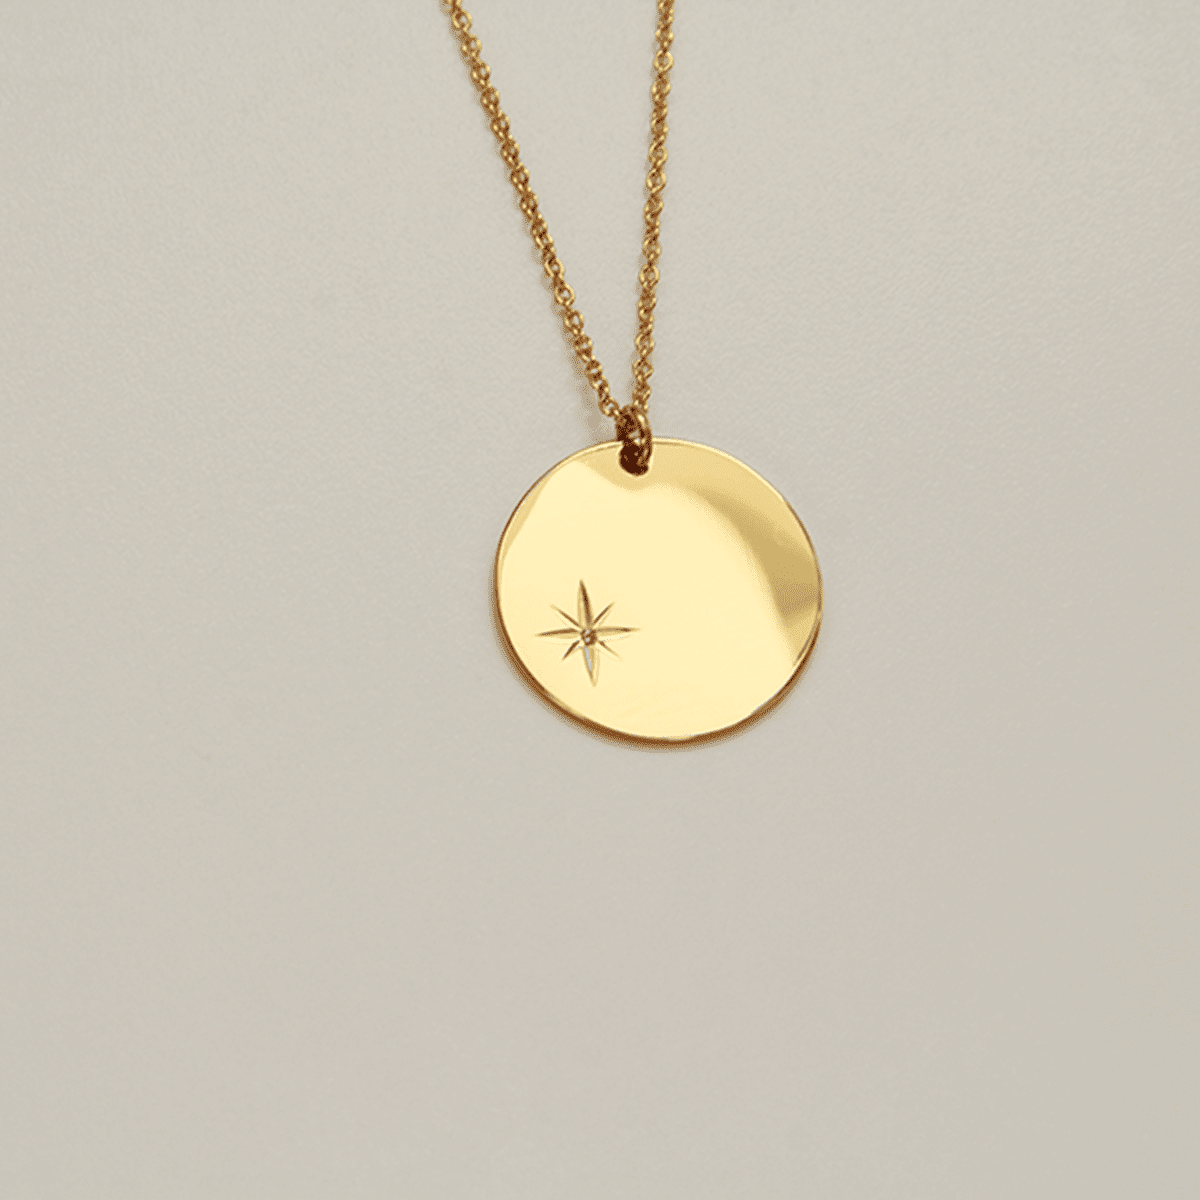 18k Gold-Plated Pendant With Small Polar Star Medal - Tanzire Store